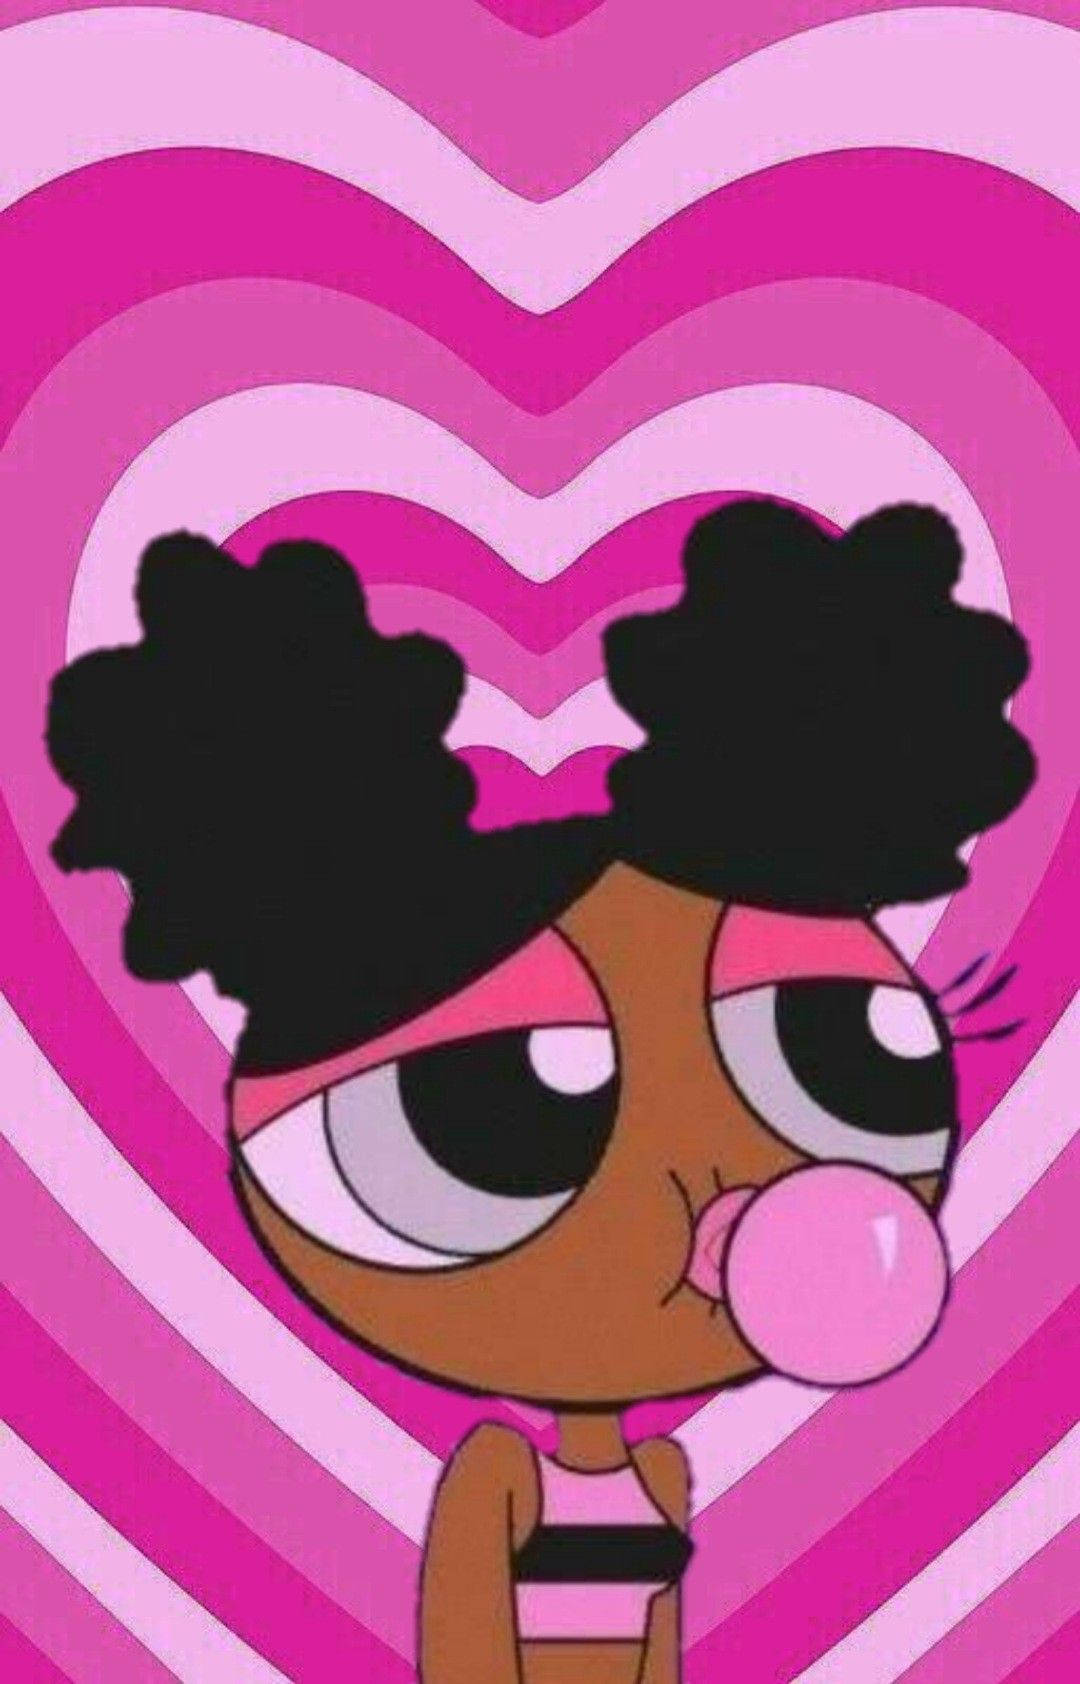 Download Curly-Haired Baddie Cartoon Buttercup Wallpaper